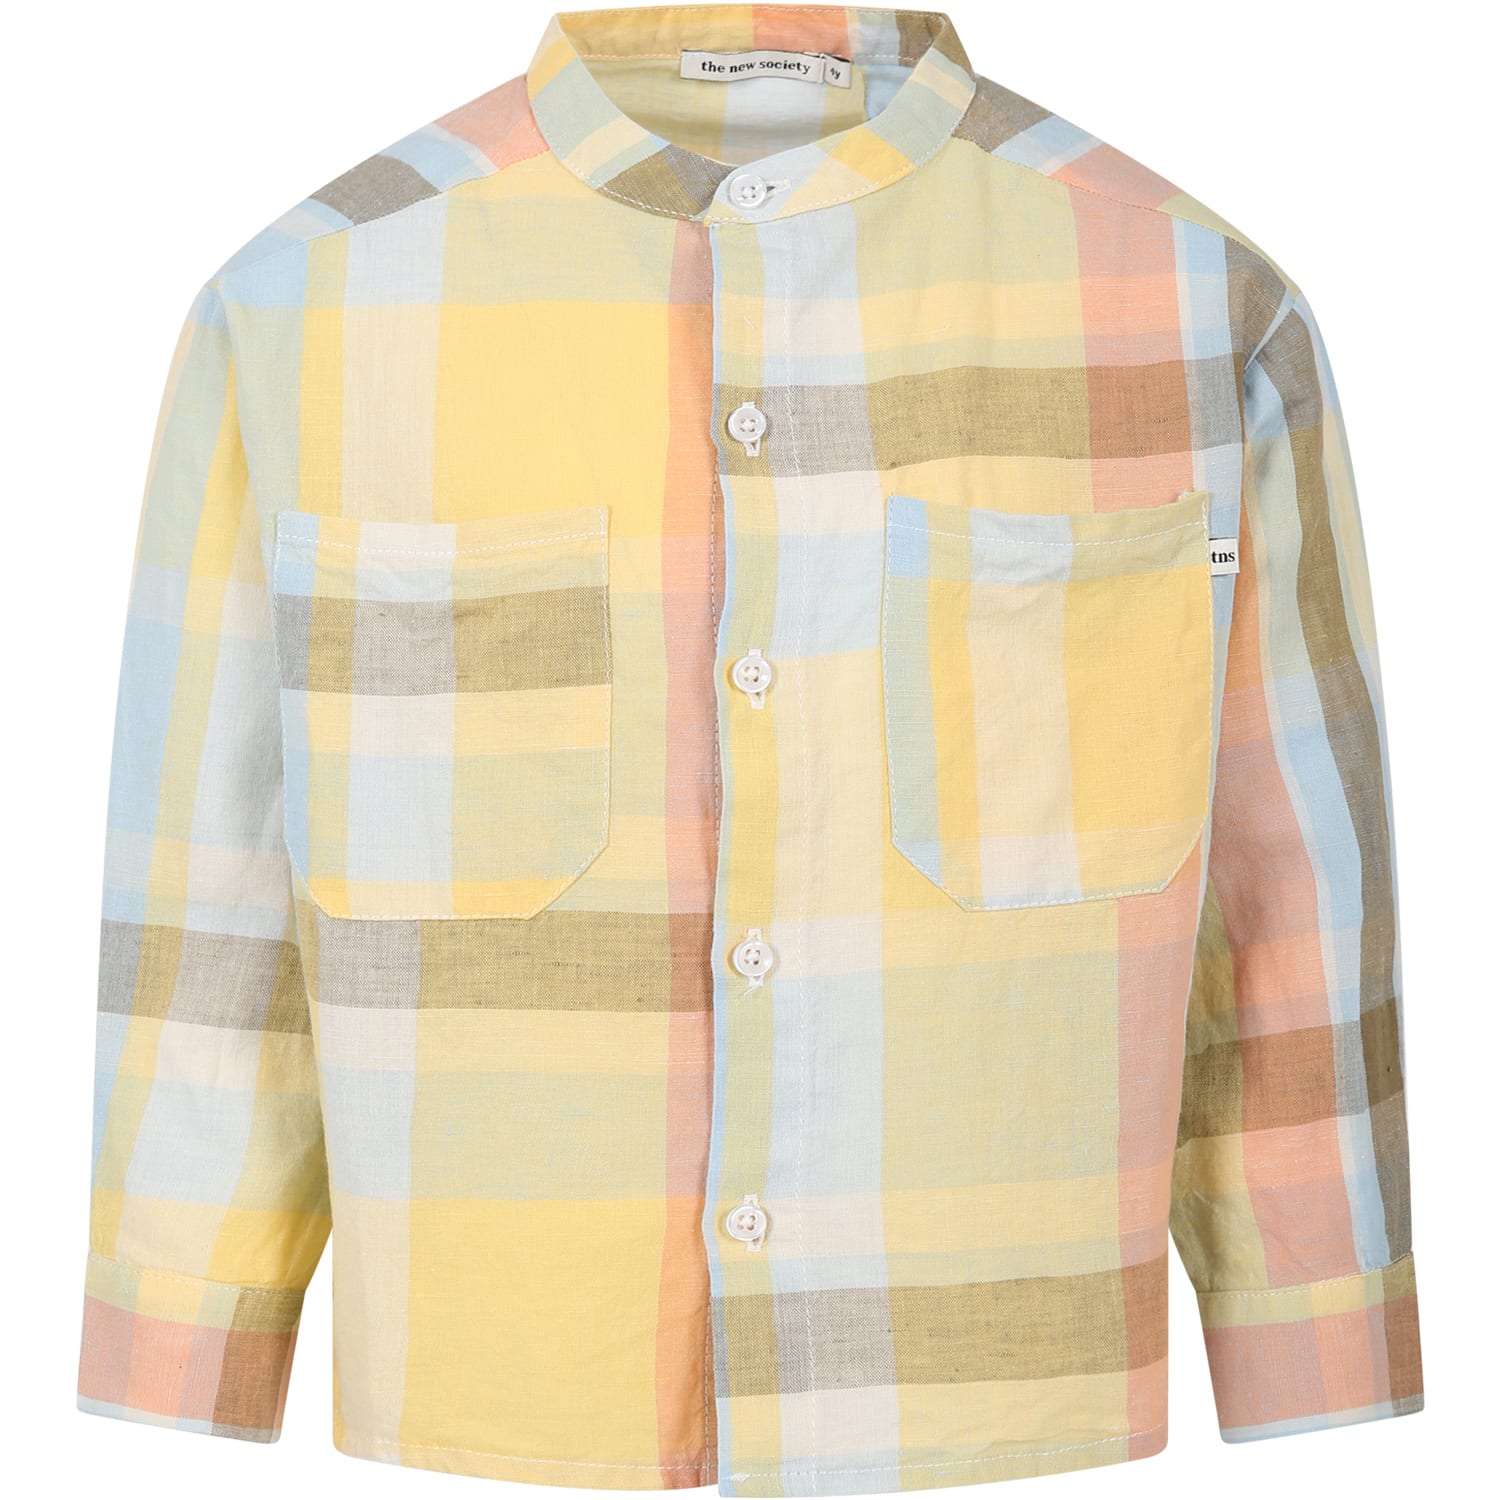 The New Society Kids' Multicolor Shirt For Boy With Logo